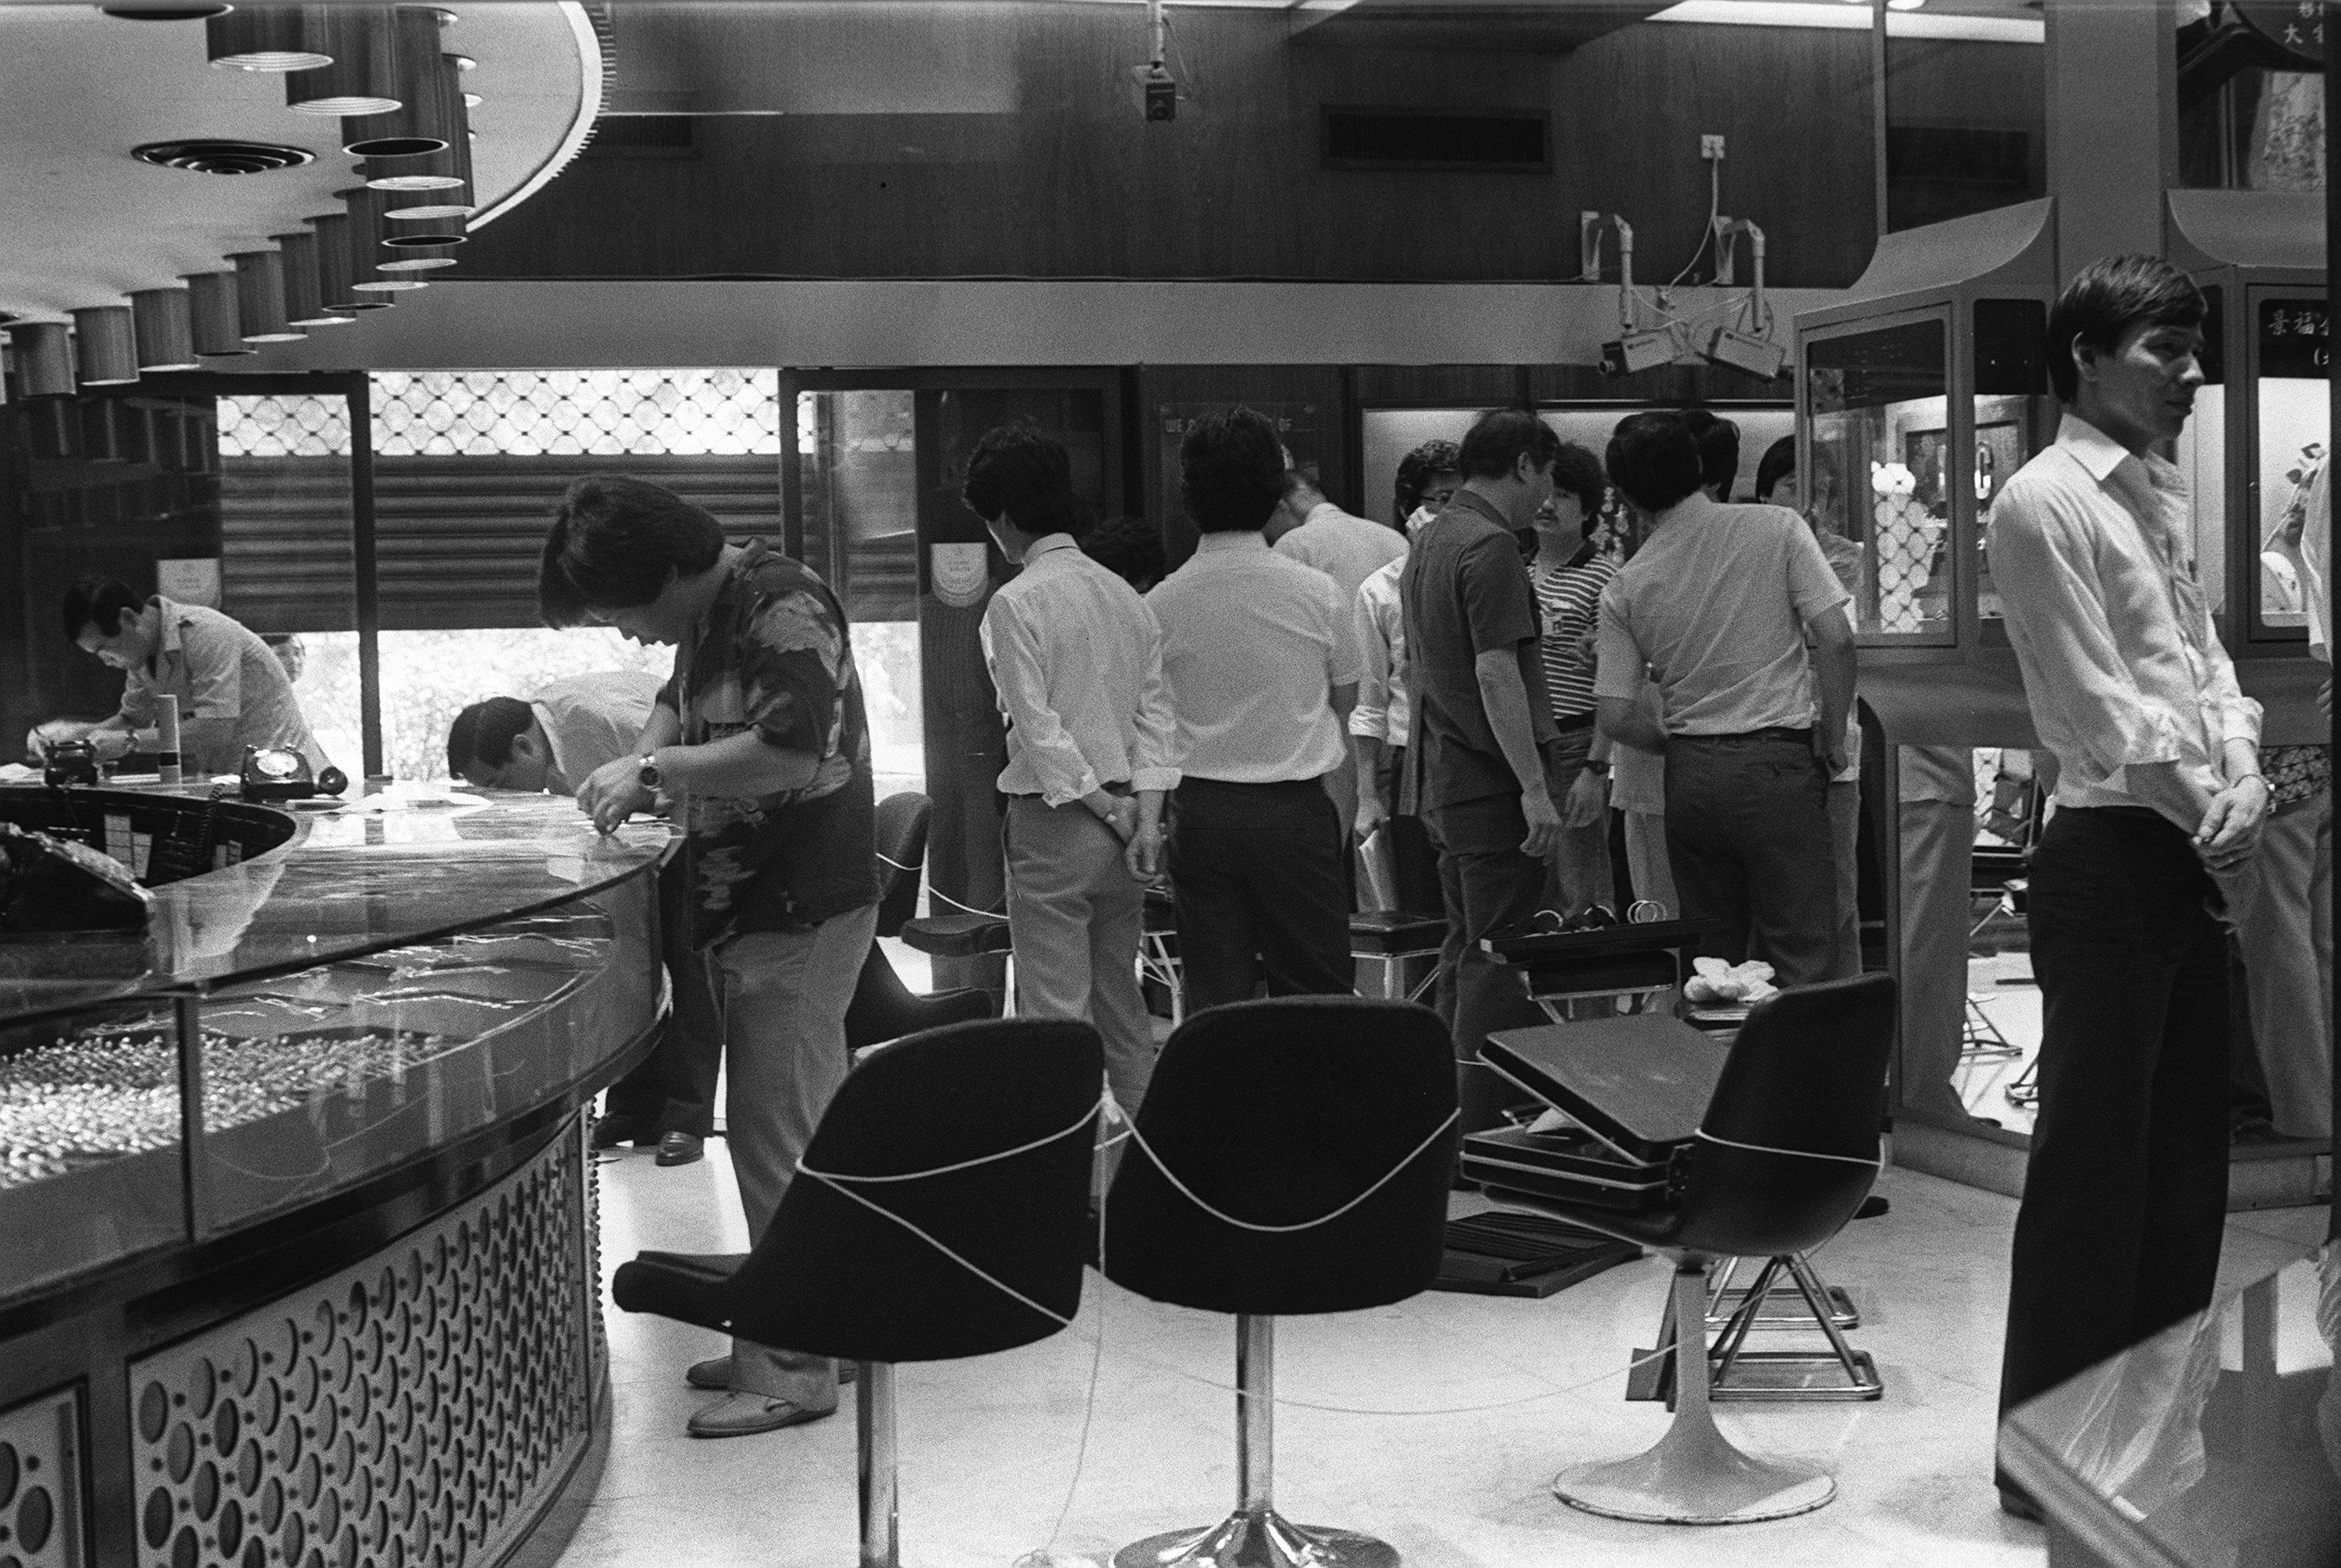 Police investigate at the King Fook Gold and Jewellery Company in Nathan Road in Tsim Sha Shui, Hong Kong, in 1983, after a robbery in which two security guards were killed. Photo: SCMP